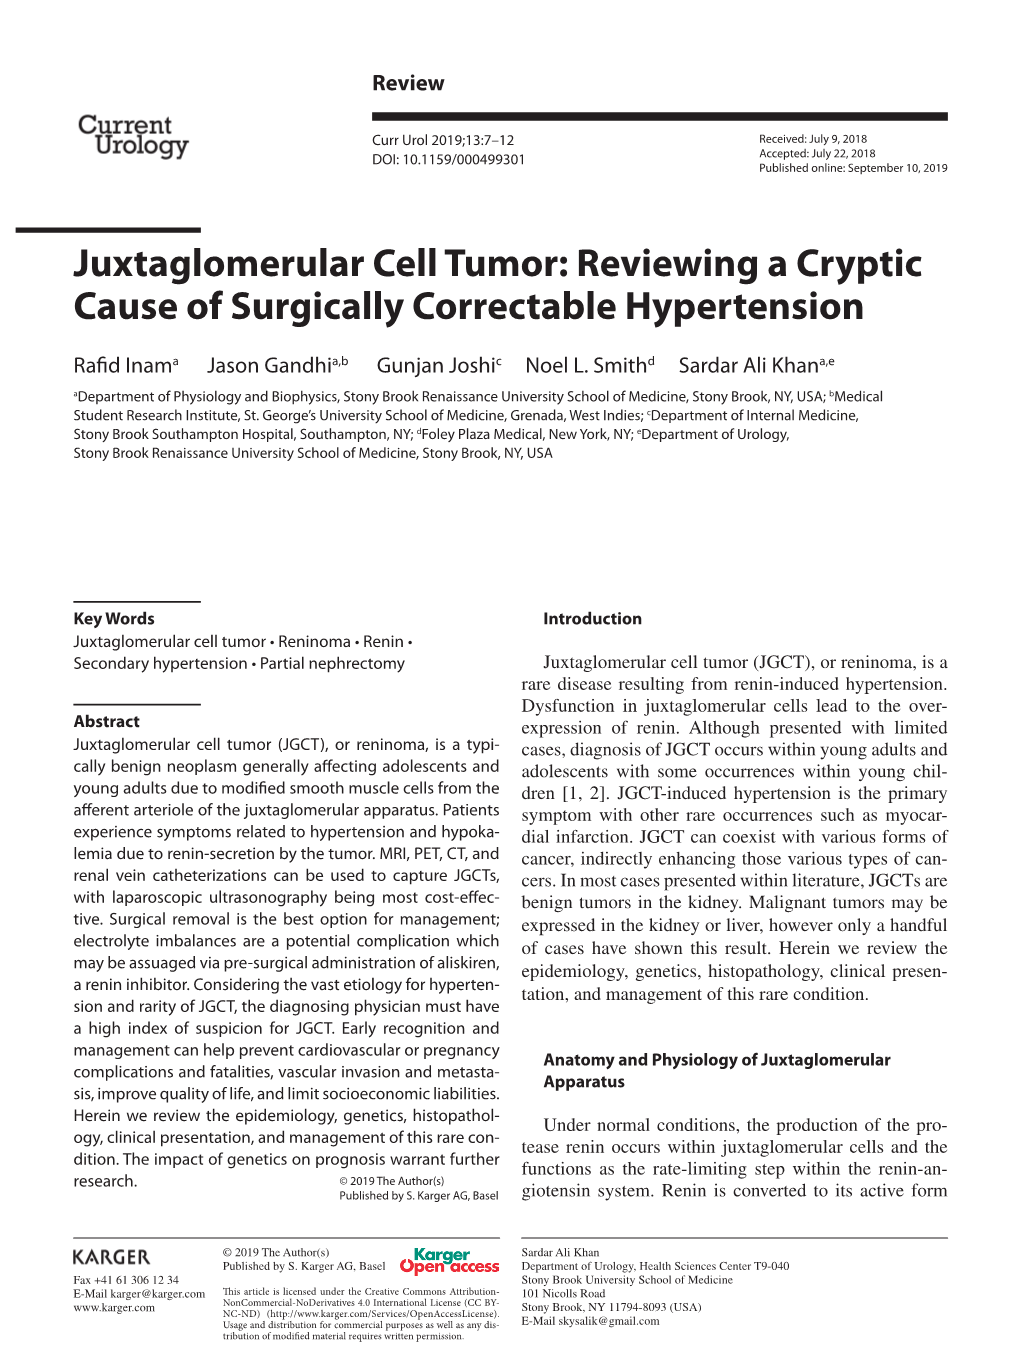 Juxtaglomerular Cell Tumor: Reviewing a Cryptic Cause of Surgically Correctable Hypertension